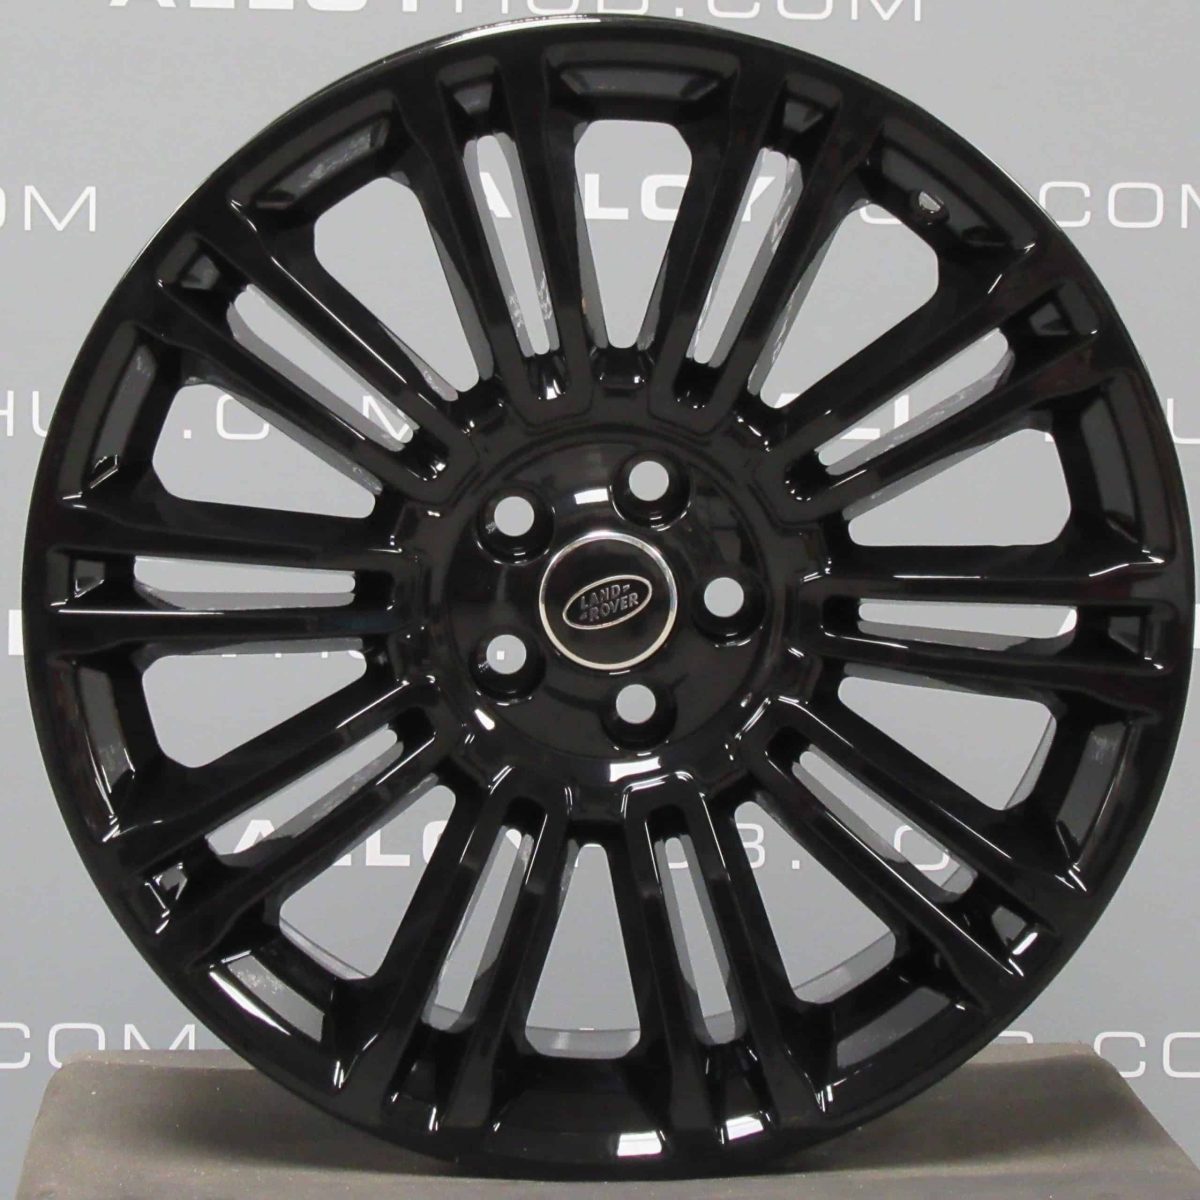 Genuine Land Rover Range Rover Evoque L538 19" inch Style 1002 Alloy Wheels with Gloss Black Finish LR048428